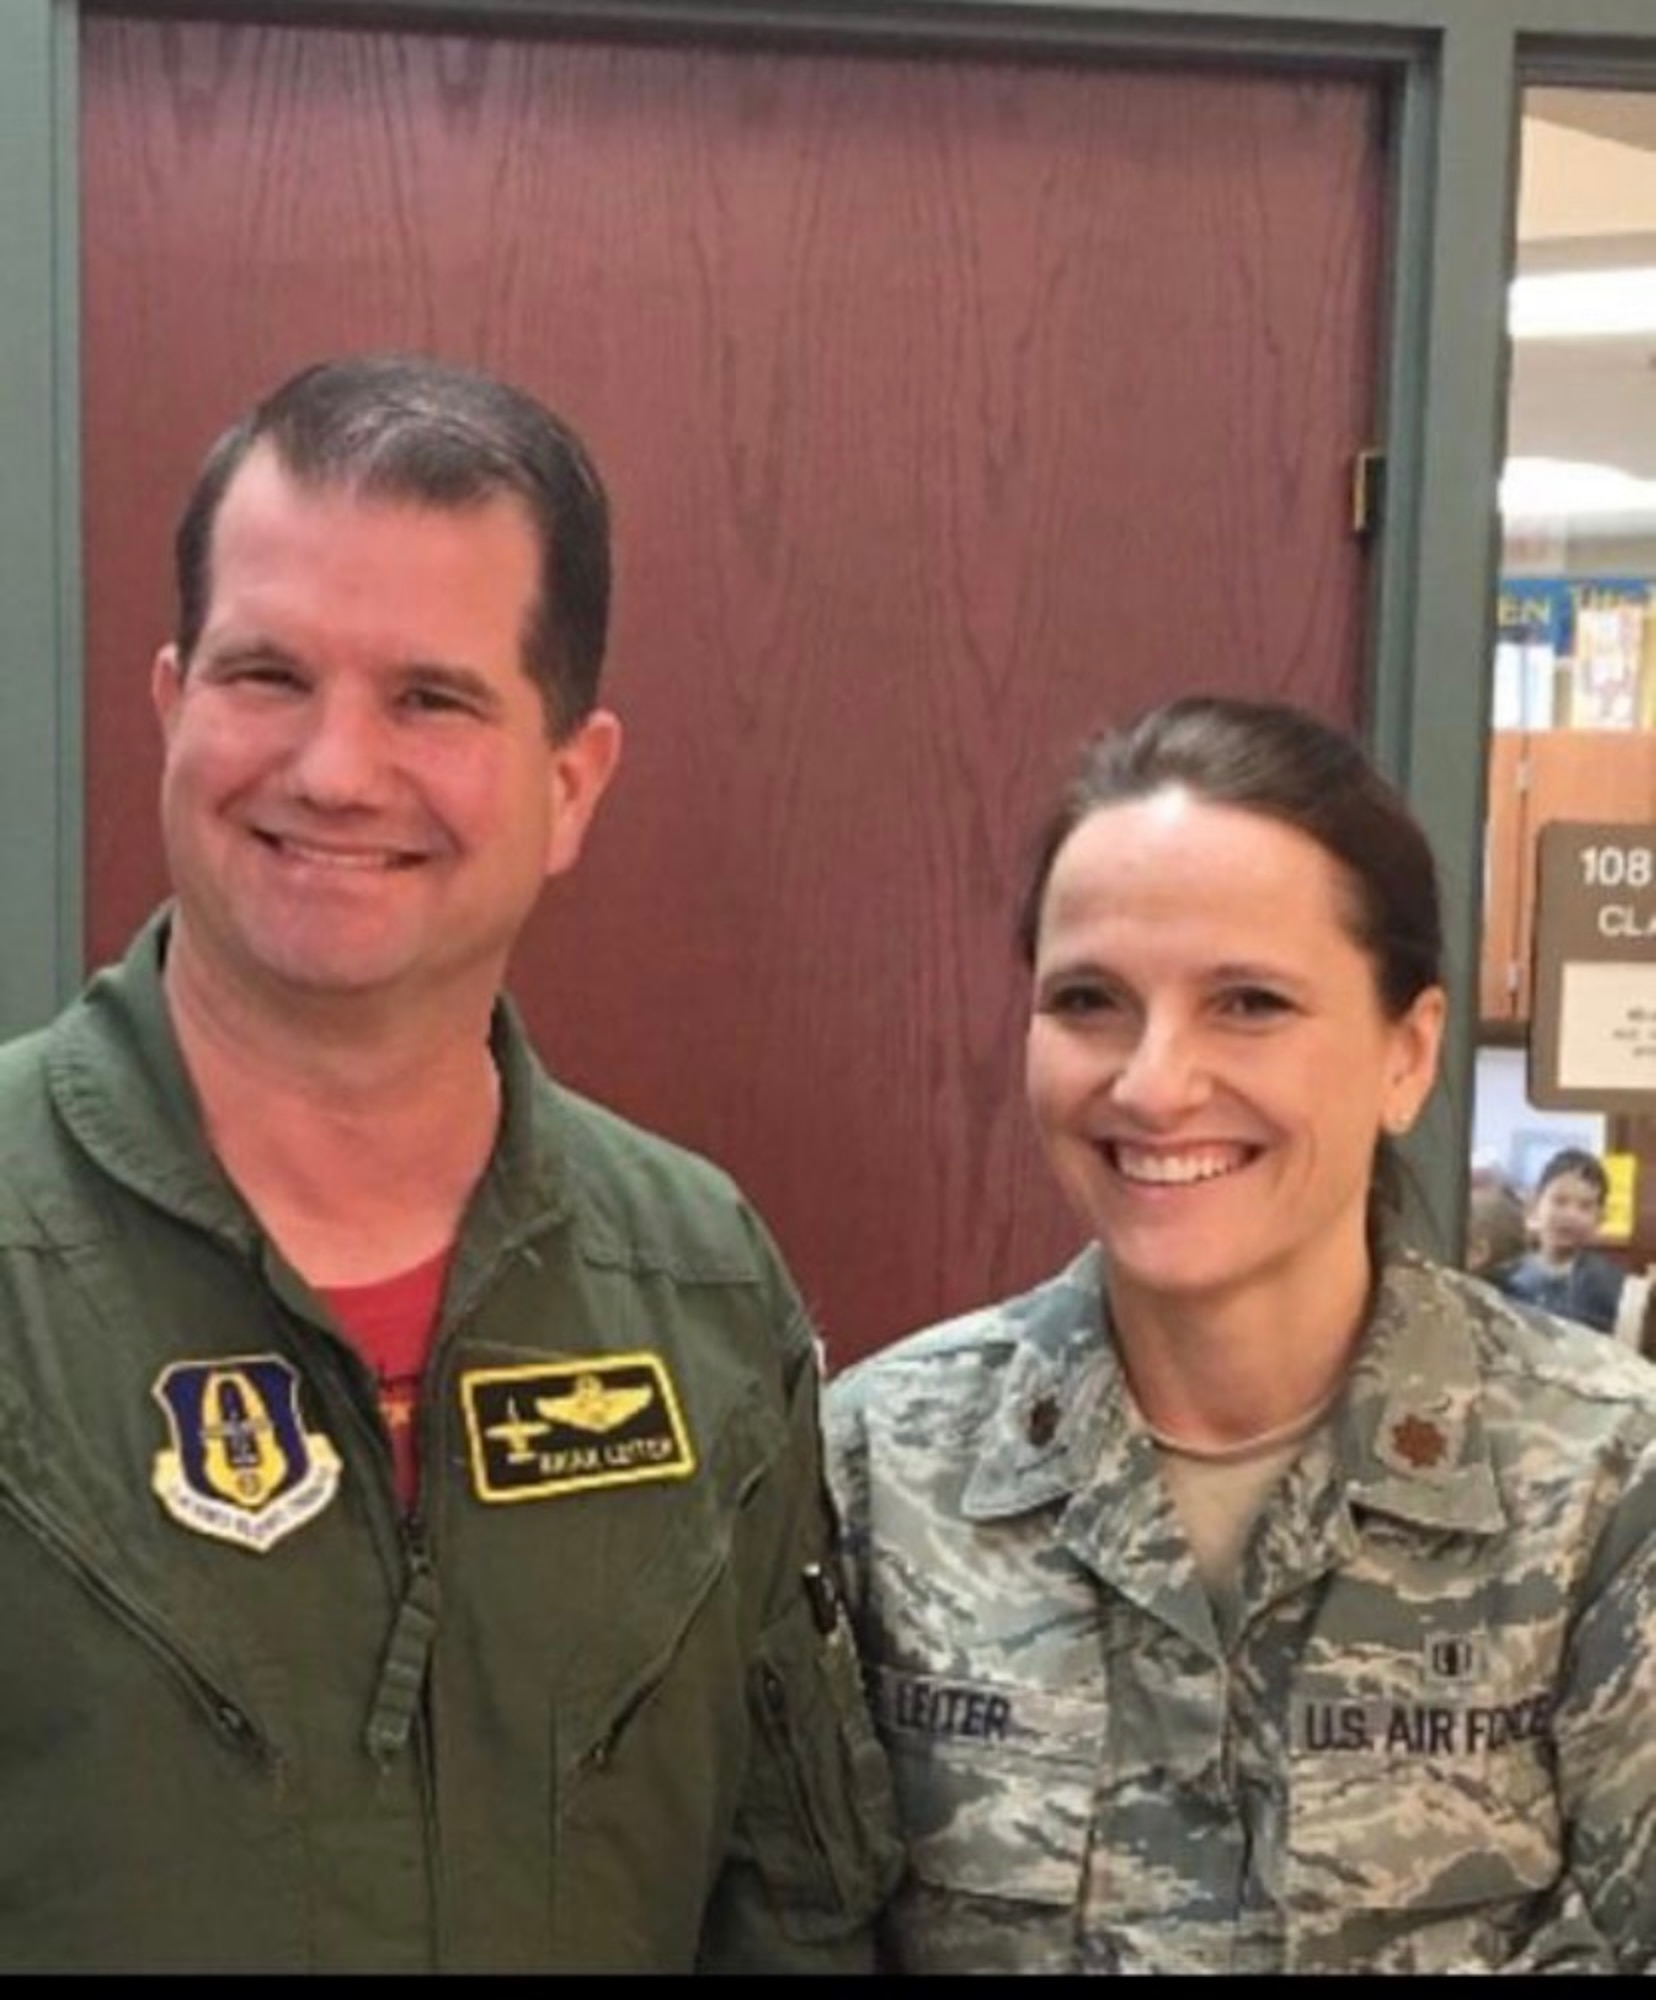 Lt. Col. Brian Leiter and his wife, Maj. (ret) Trena Leiter pose in a picture at Whiteman AFB in 2017. Lt. Col. Brian Leiter is now an A-10C Thunderbolt II pilot and his wife, Maj. (ret) Trena Leiter, a dentist, both assigned to the 442d Fighter Wing.